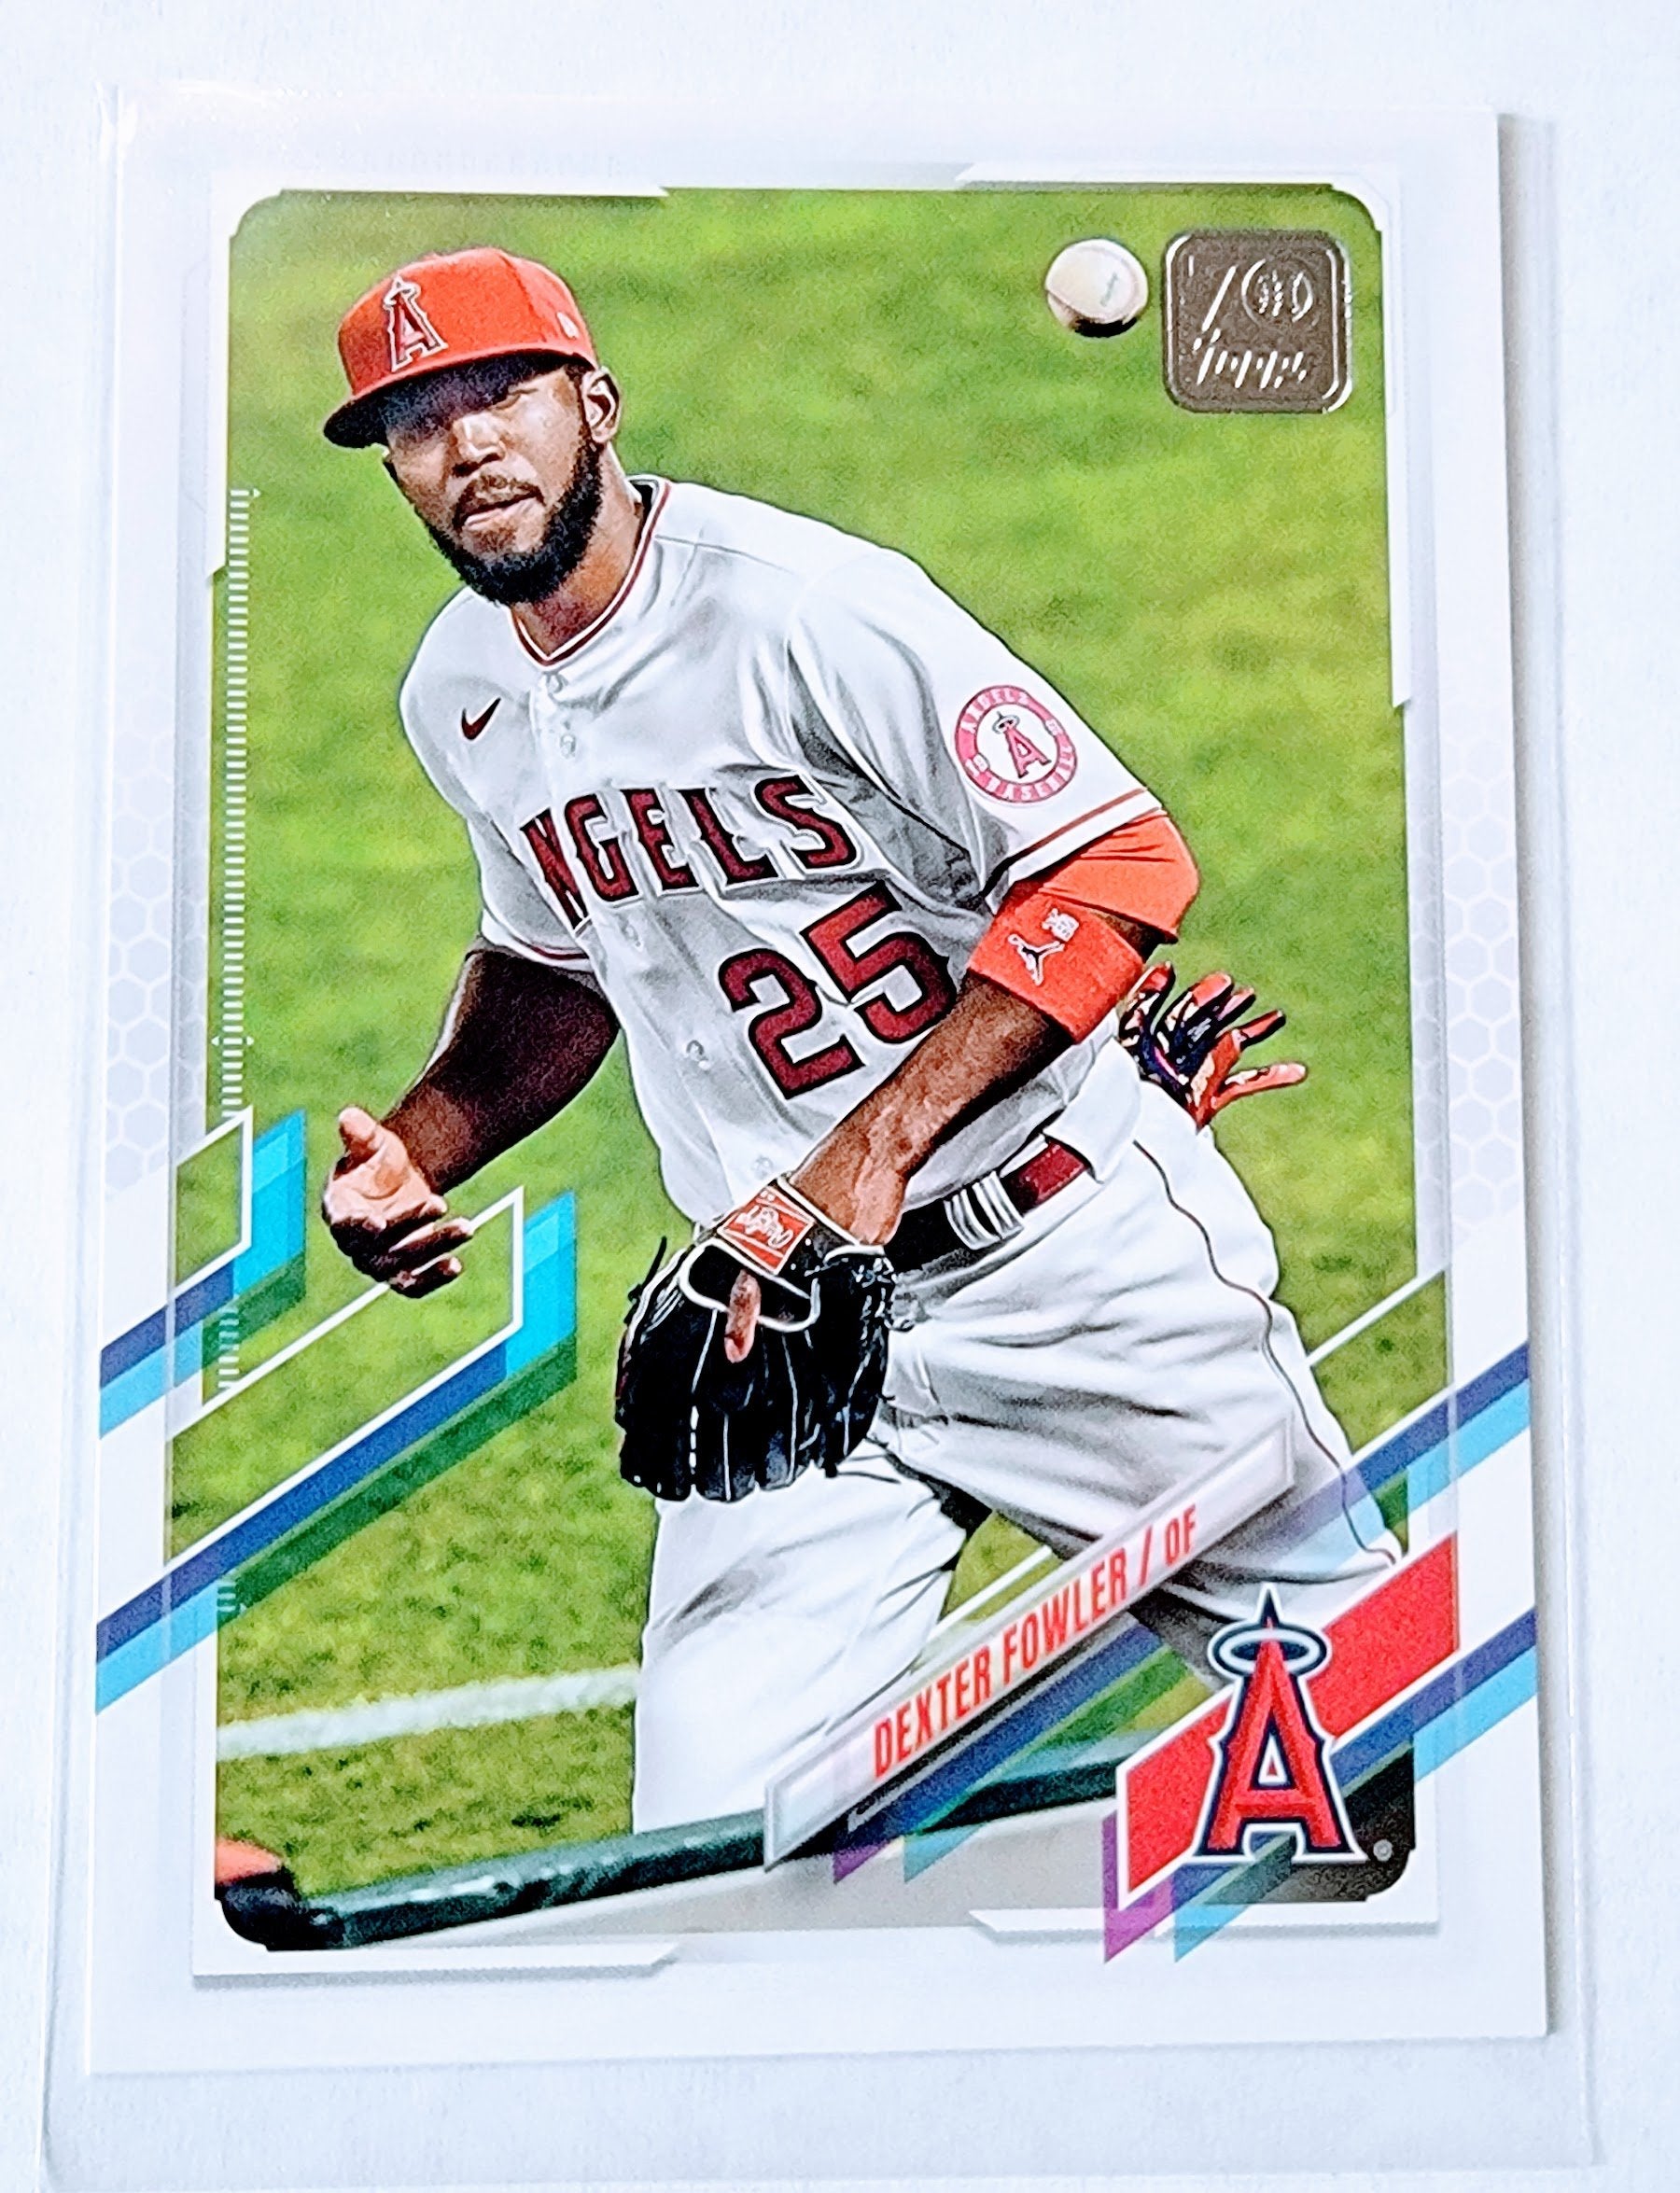 2021 Topps Update Dexter Fowler Baseball Trading Card SMCB1 simple Xclusive Collectibles   